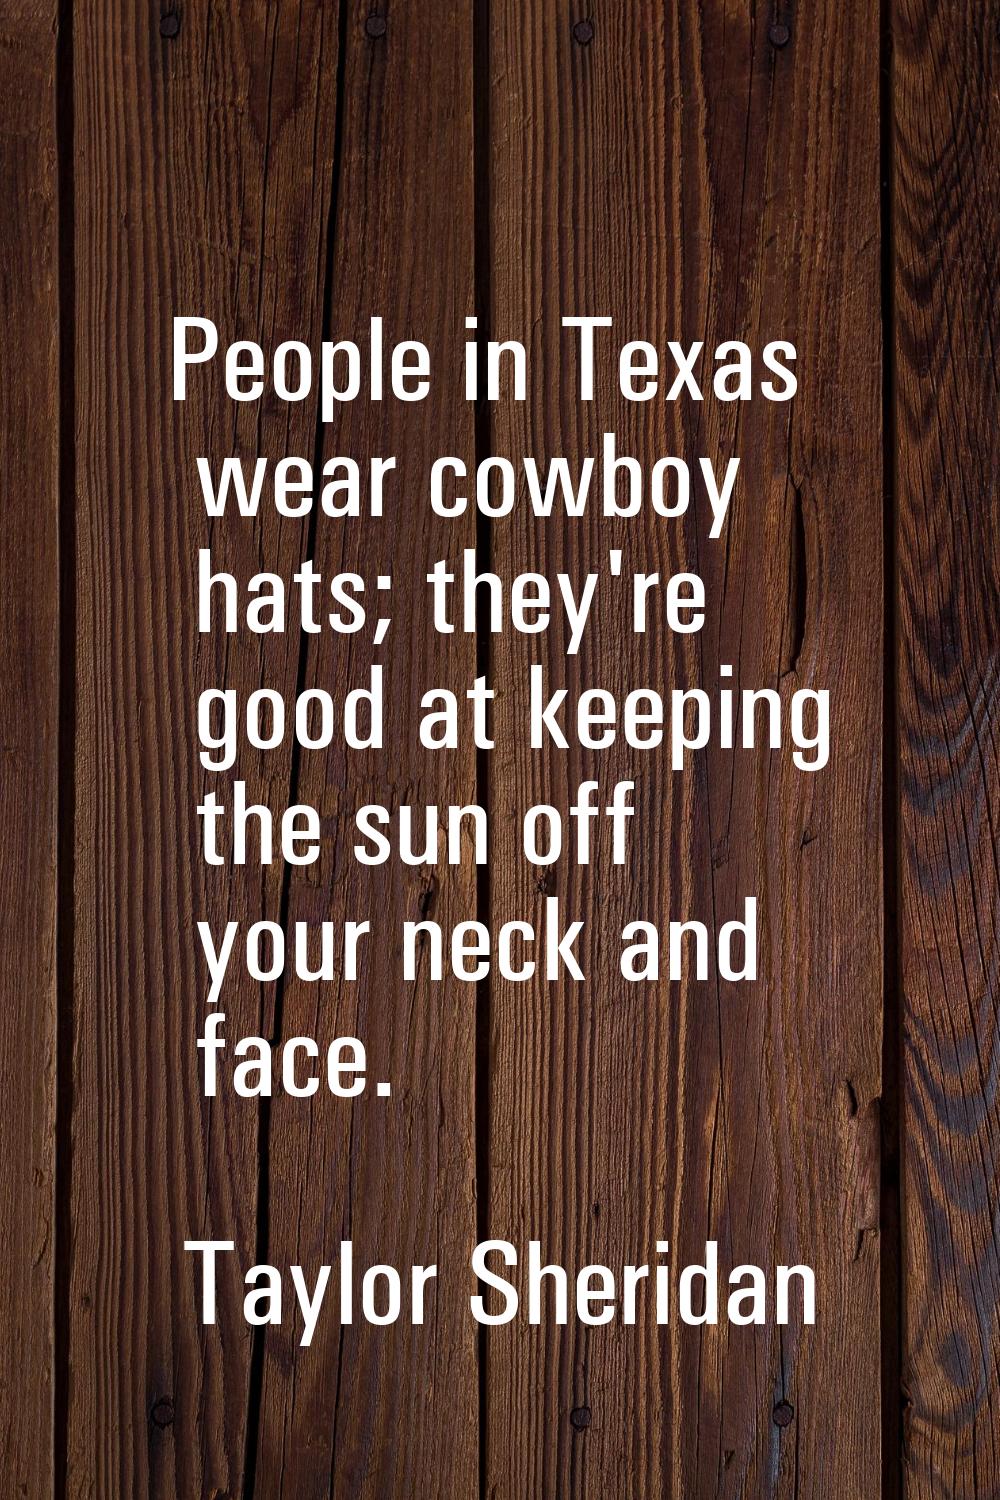 People in Texas wear cowboy hats; they're good at keeping the sun off your neck and face.